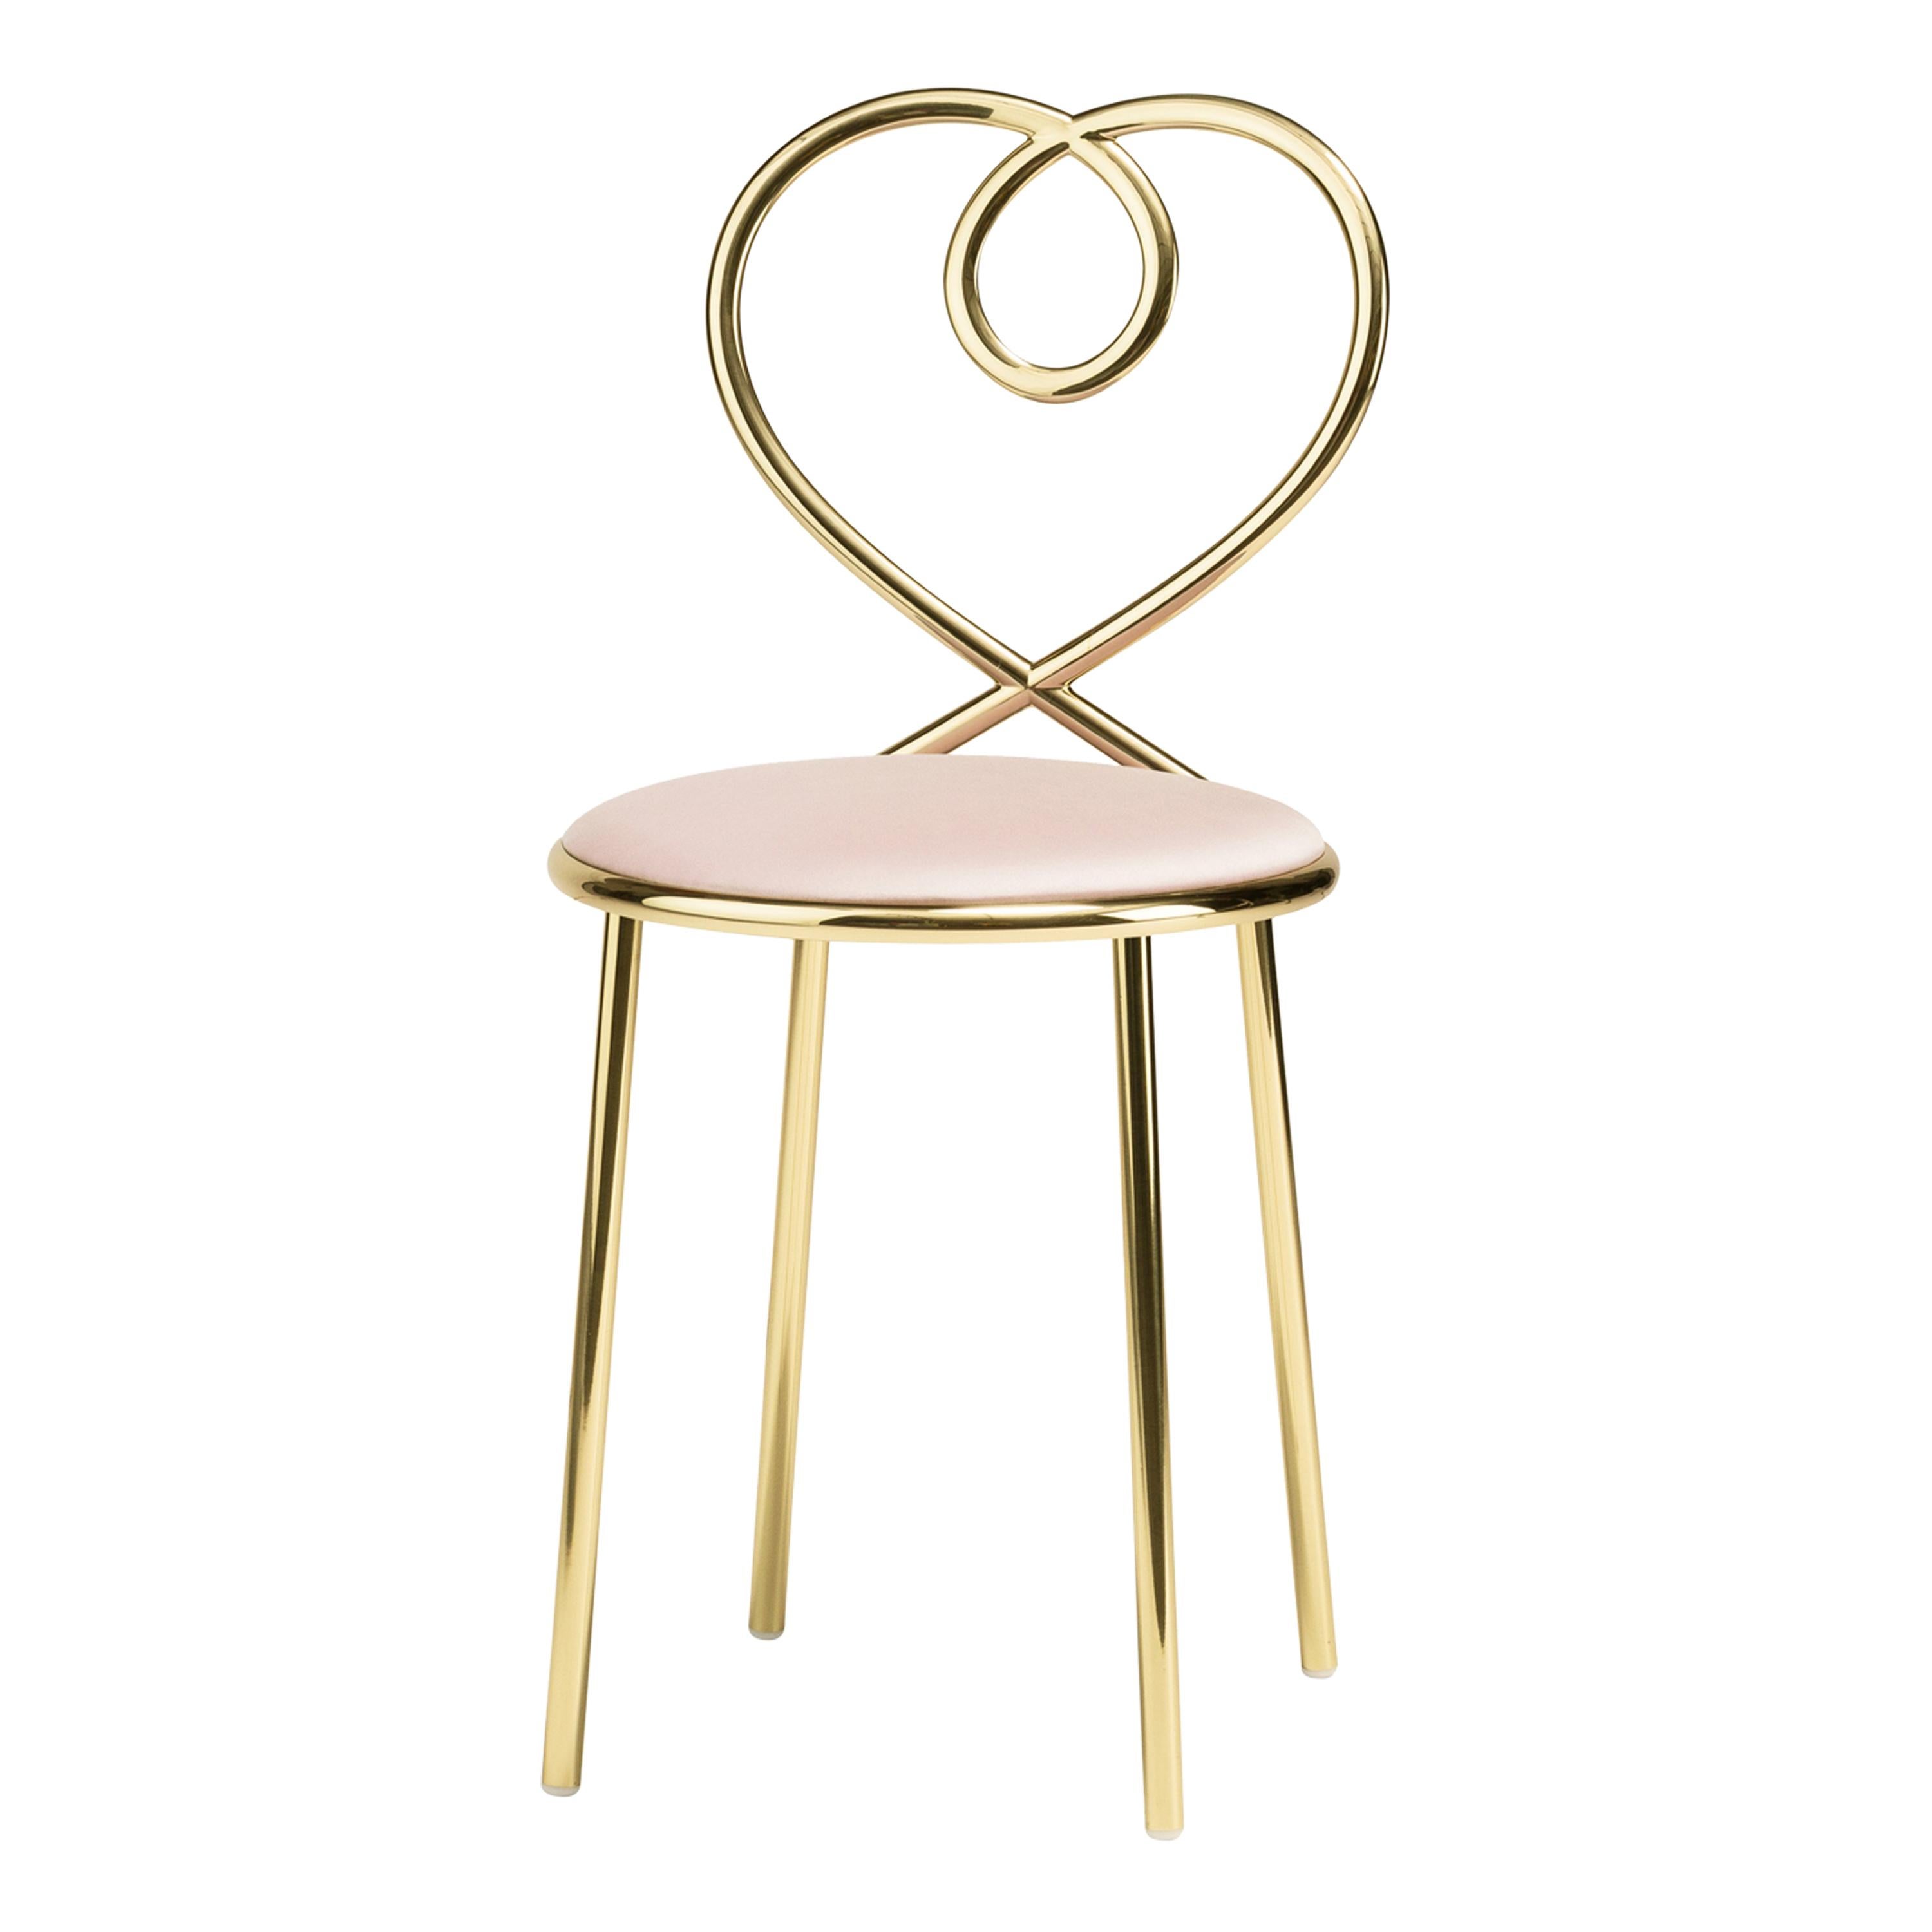 Love Chair in Rose with Polished Brass by Nika Zupanc